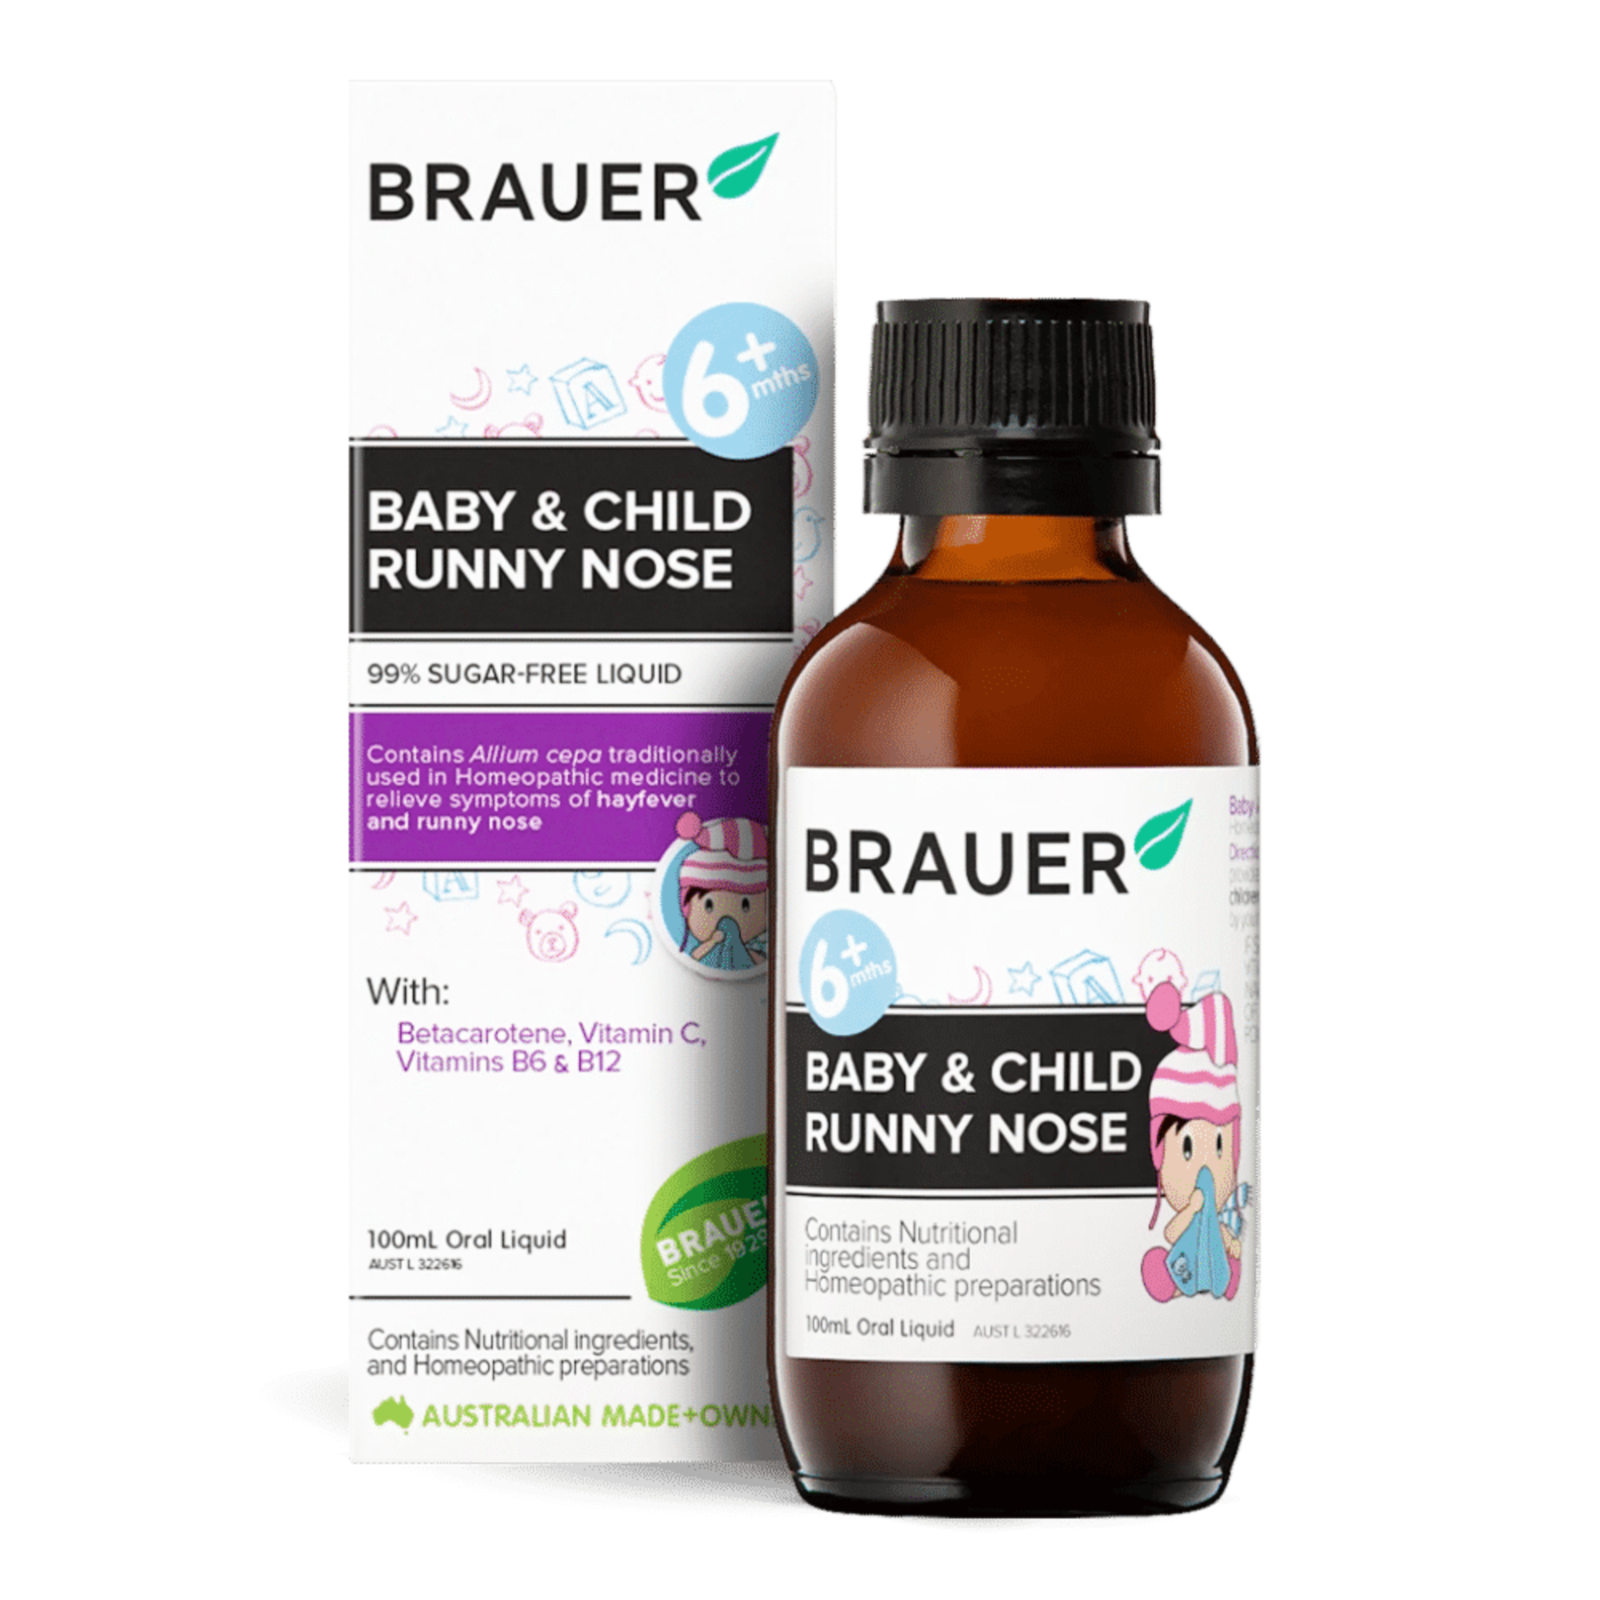 Primary image for Brauer Baby & Child Runny Nose 100mL Oral Liquid